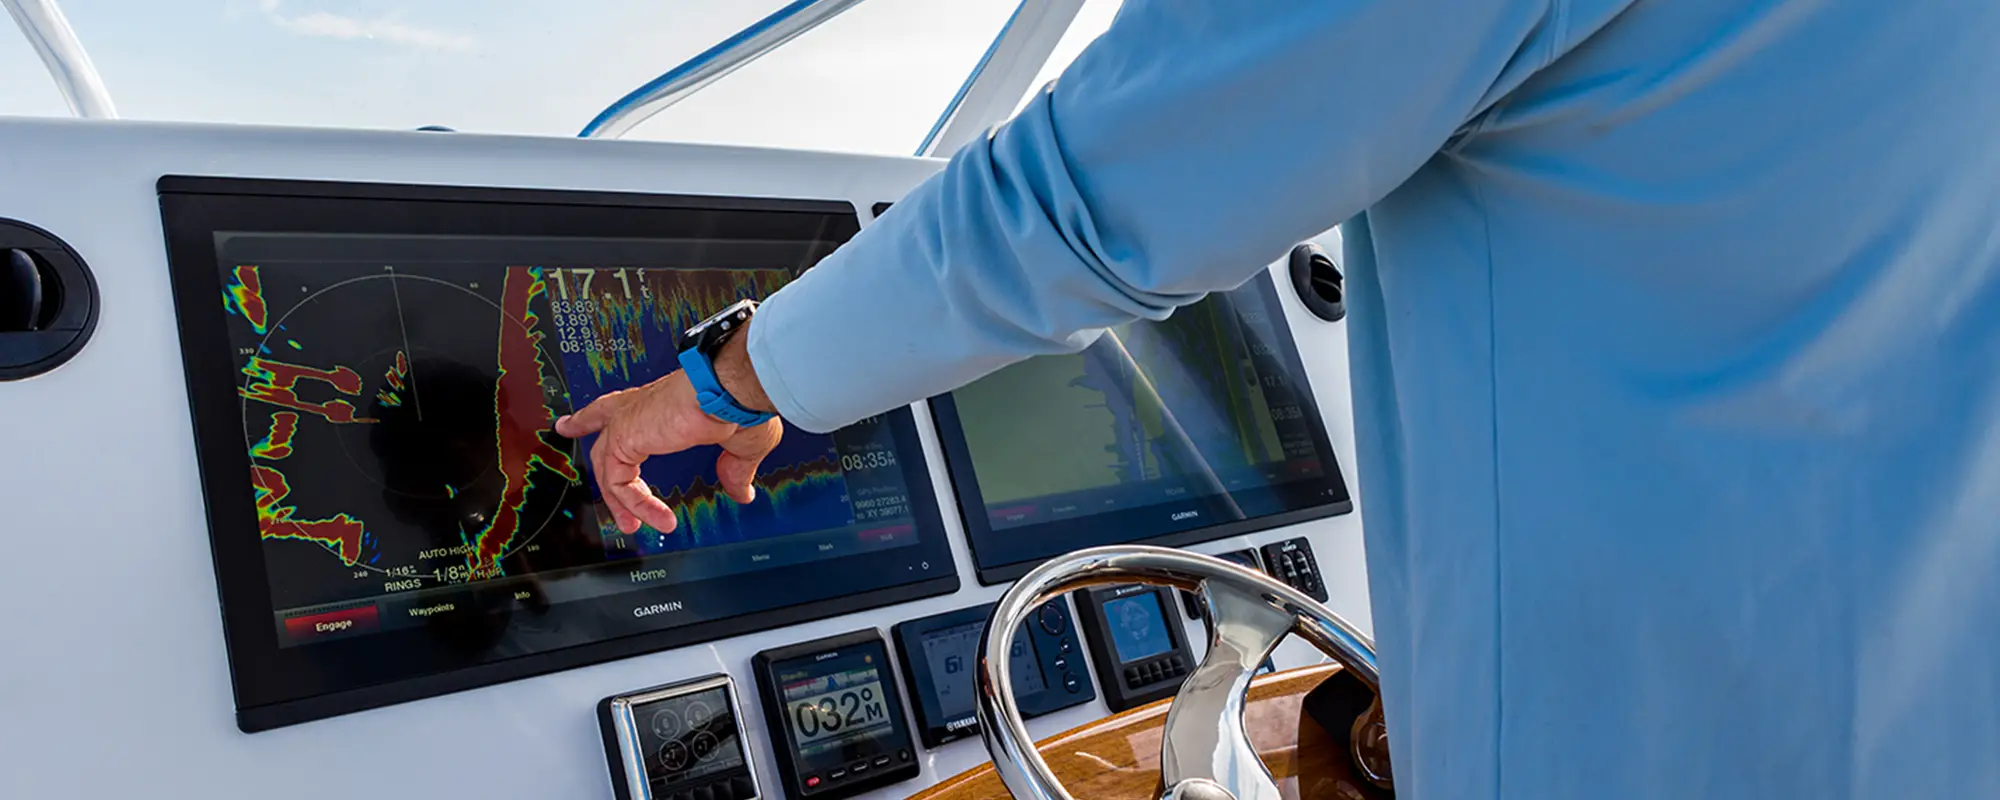 Screen of fish finder inside a luxury boat